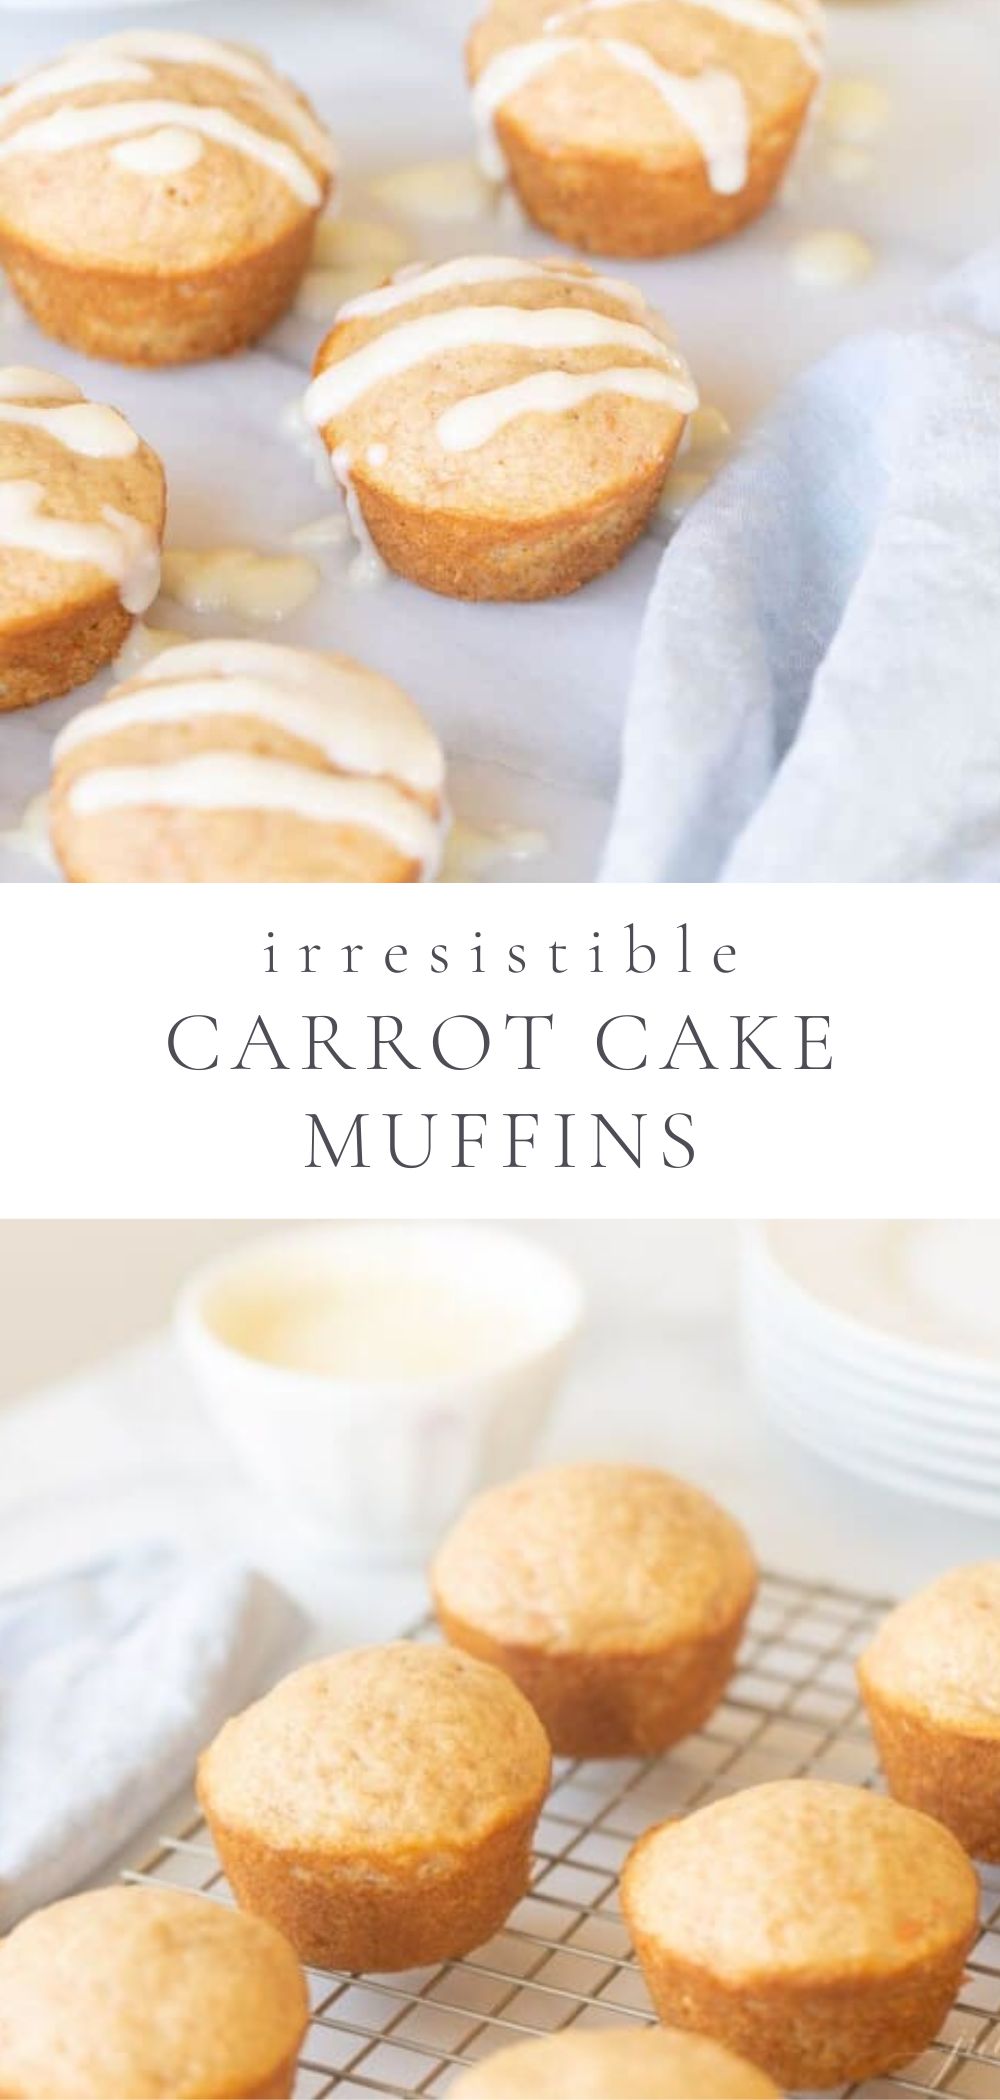 carrot cake muffins with a stack of plates and pitcher of frosting in the background.